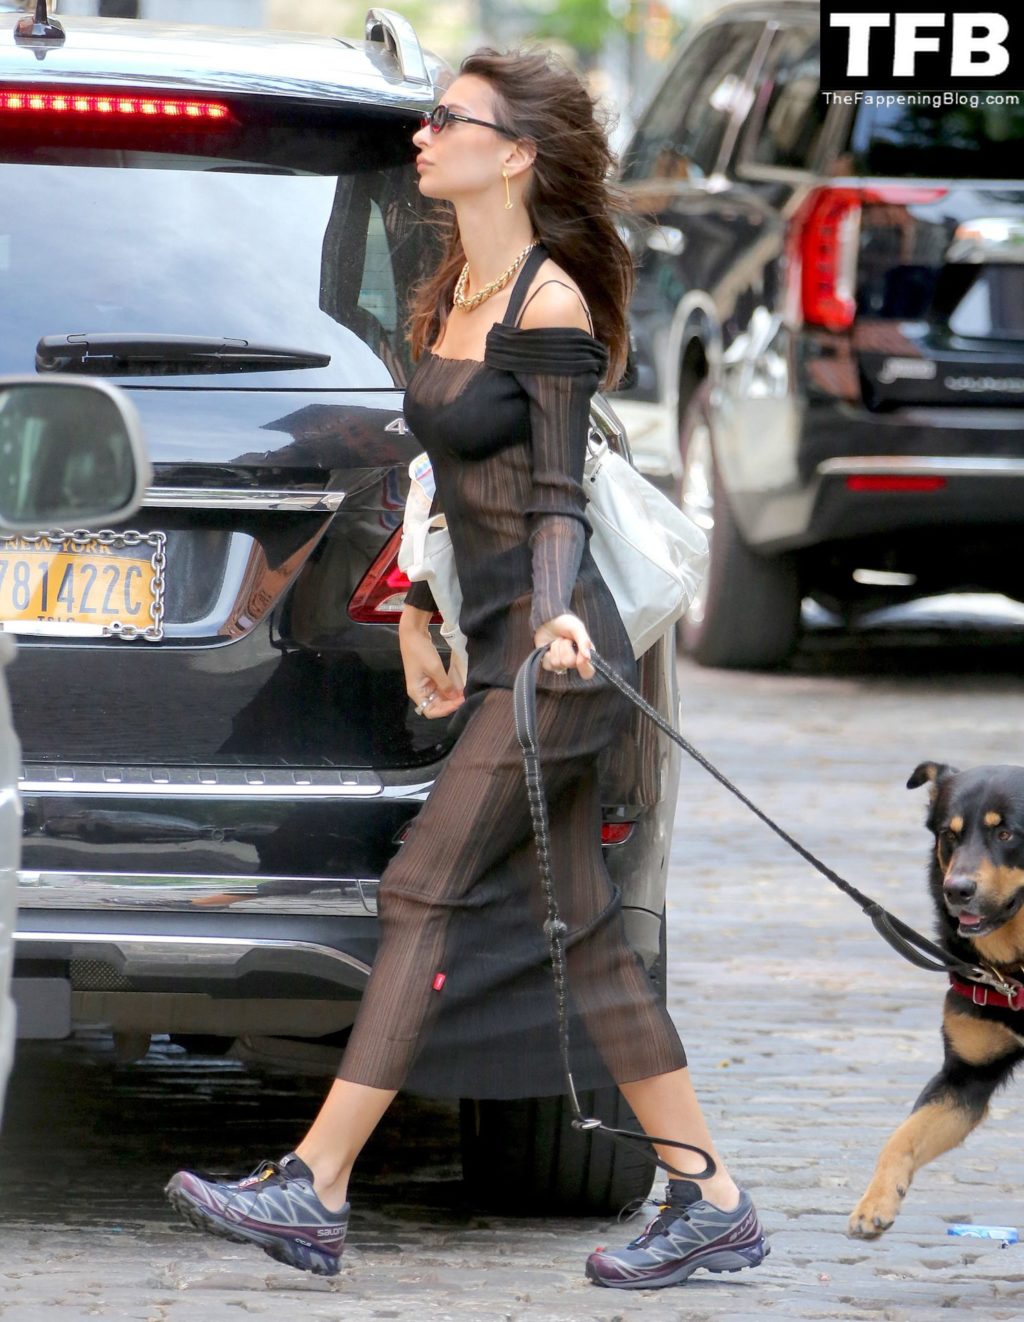 Emily Ratajkowski Sexy The Fappening Blog 29 1 1024x1322 - Emily Ratajkowski Bares It All in a See-Through Dress While Out Walking Her Dog in New York (33 Photos)